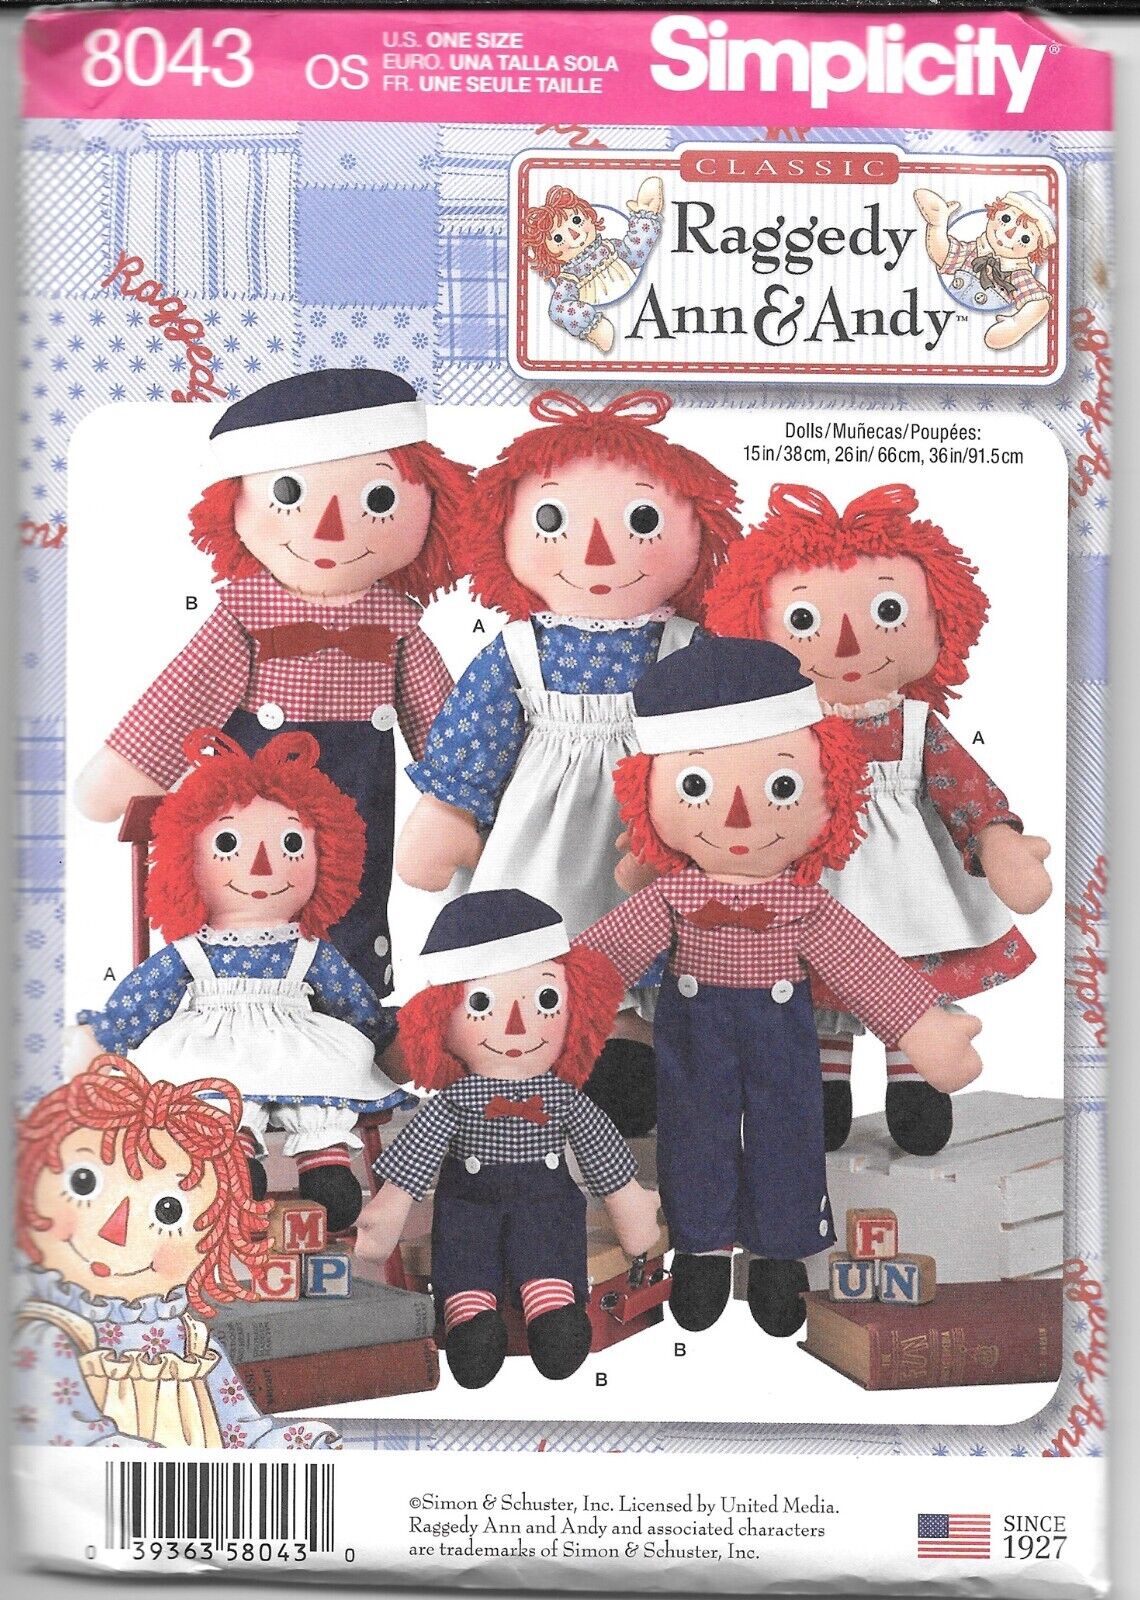 Simplicity Sewing Craft Patten 8043 Raggedy ann & andy doll and clothes UNCUT